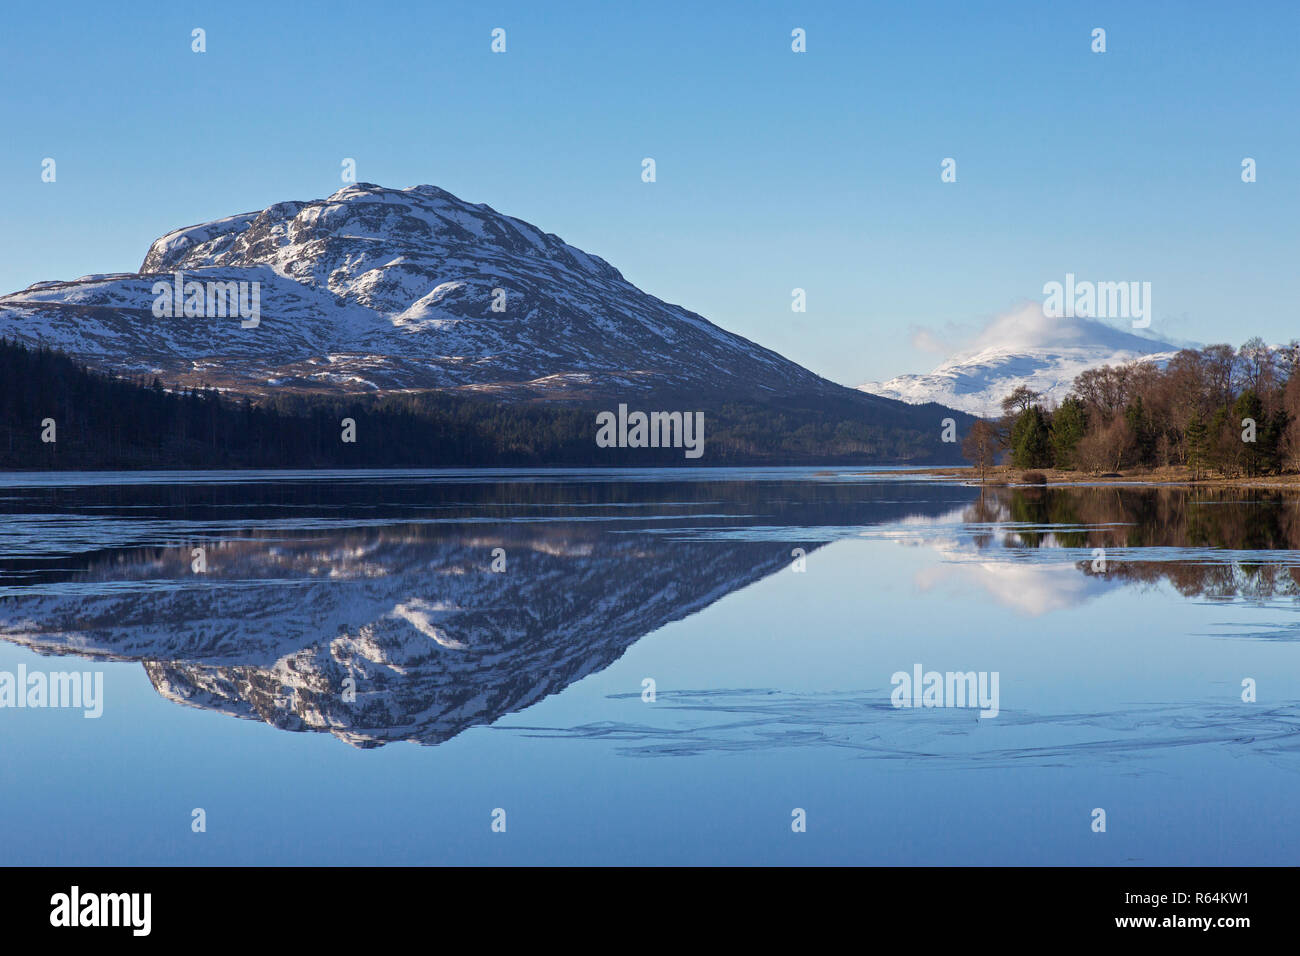 Loch Laggan and snow covered mountain Creag Meagaidh near Dalwhinnie in the Scottish Highlands in winter, Lochaber, Highland, Scotland, UK Stock Photo